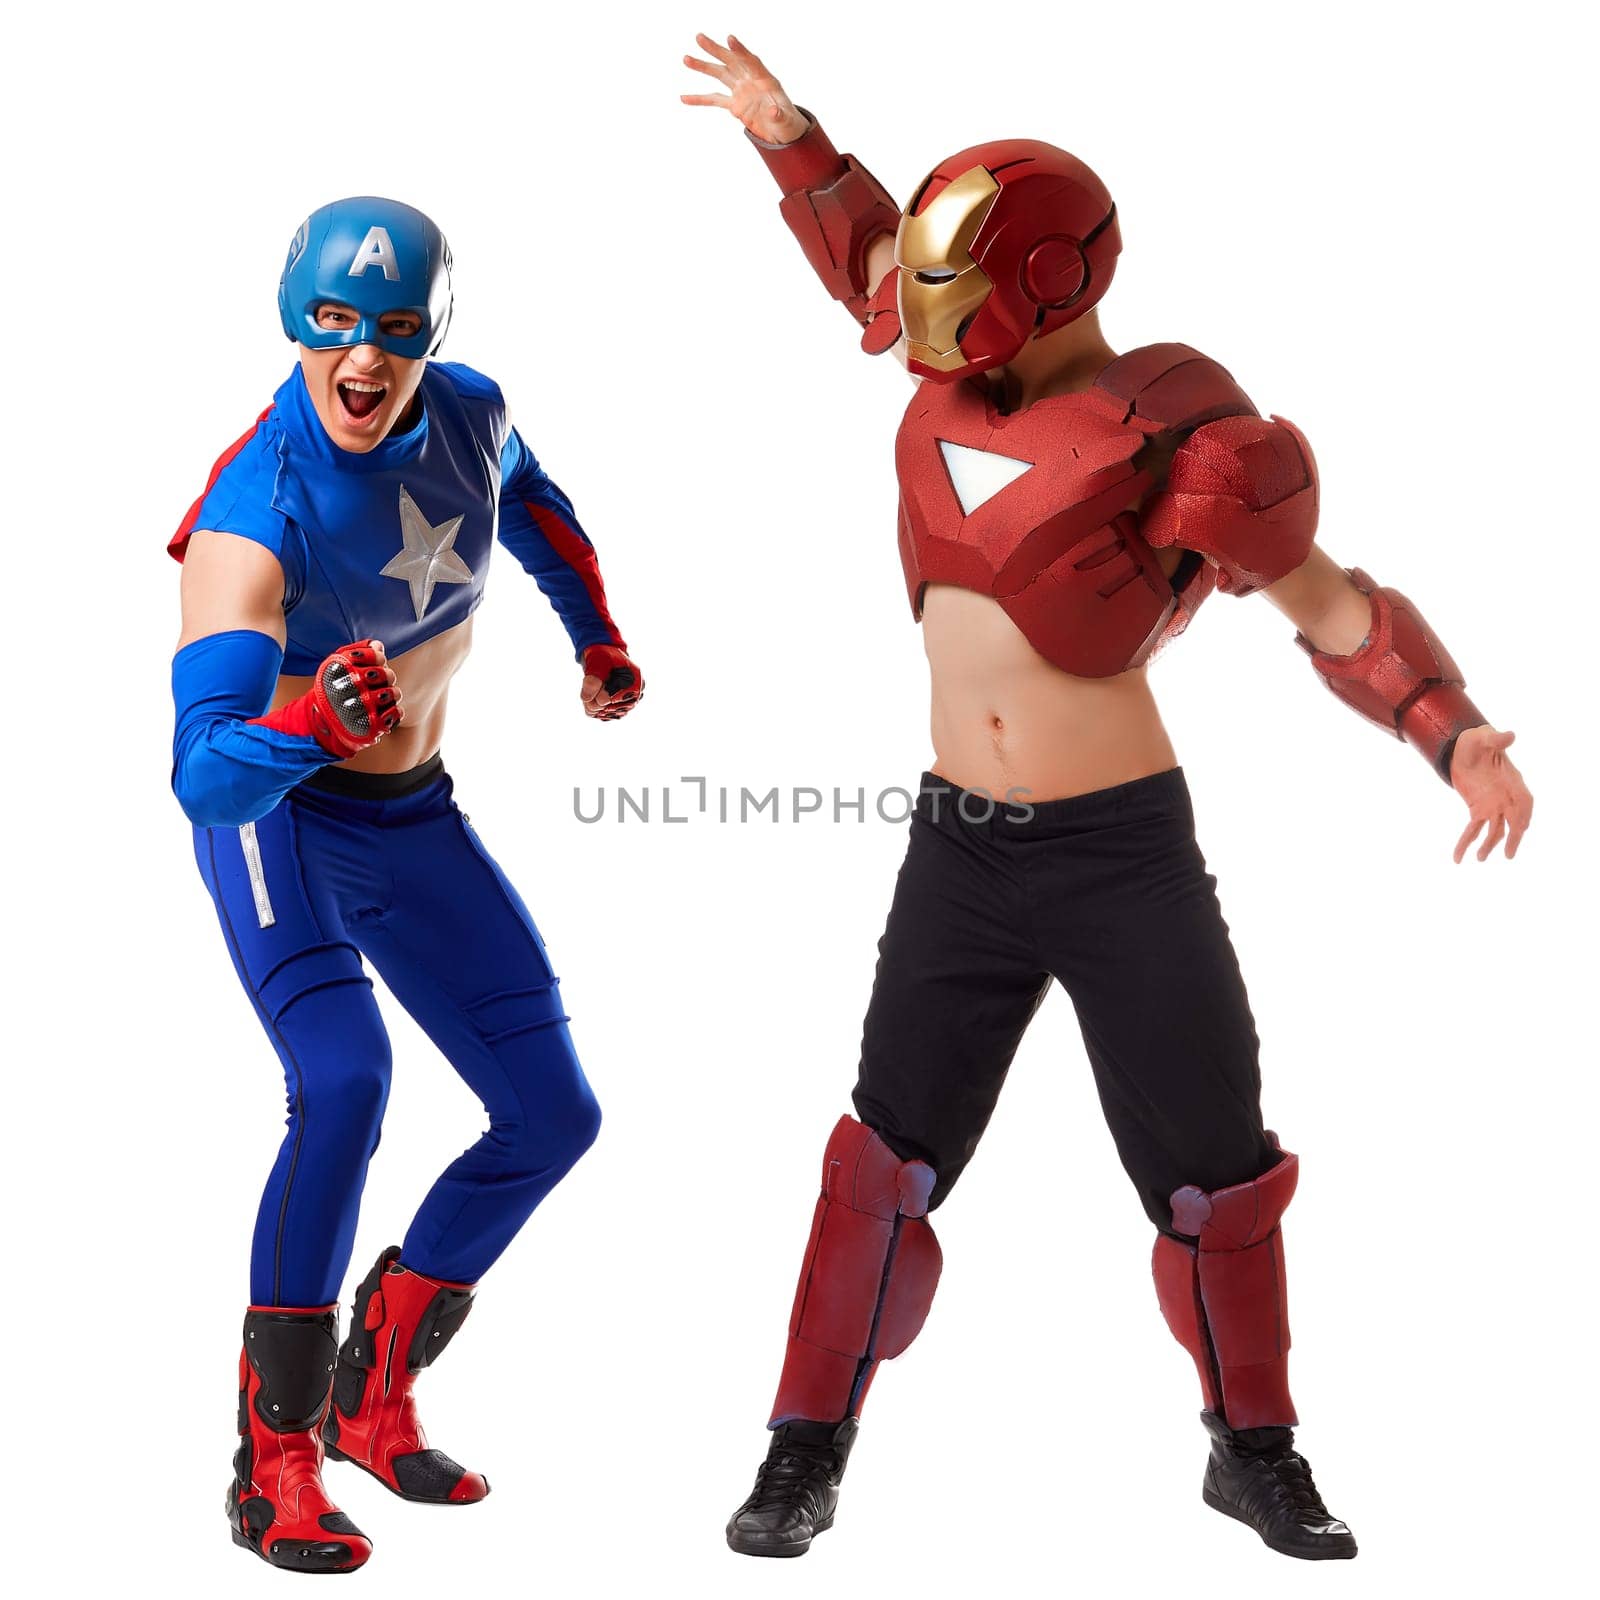 Sexy men dressed in costumes of Iron Man and Captain America